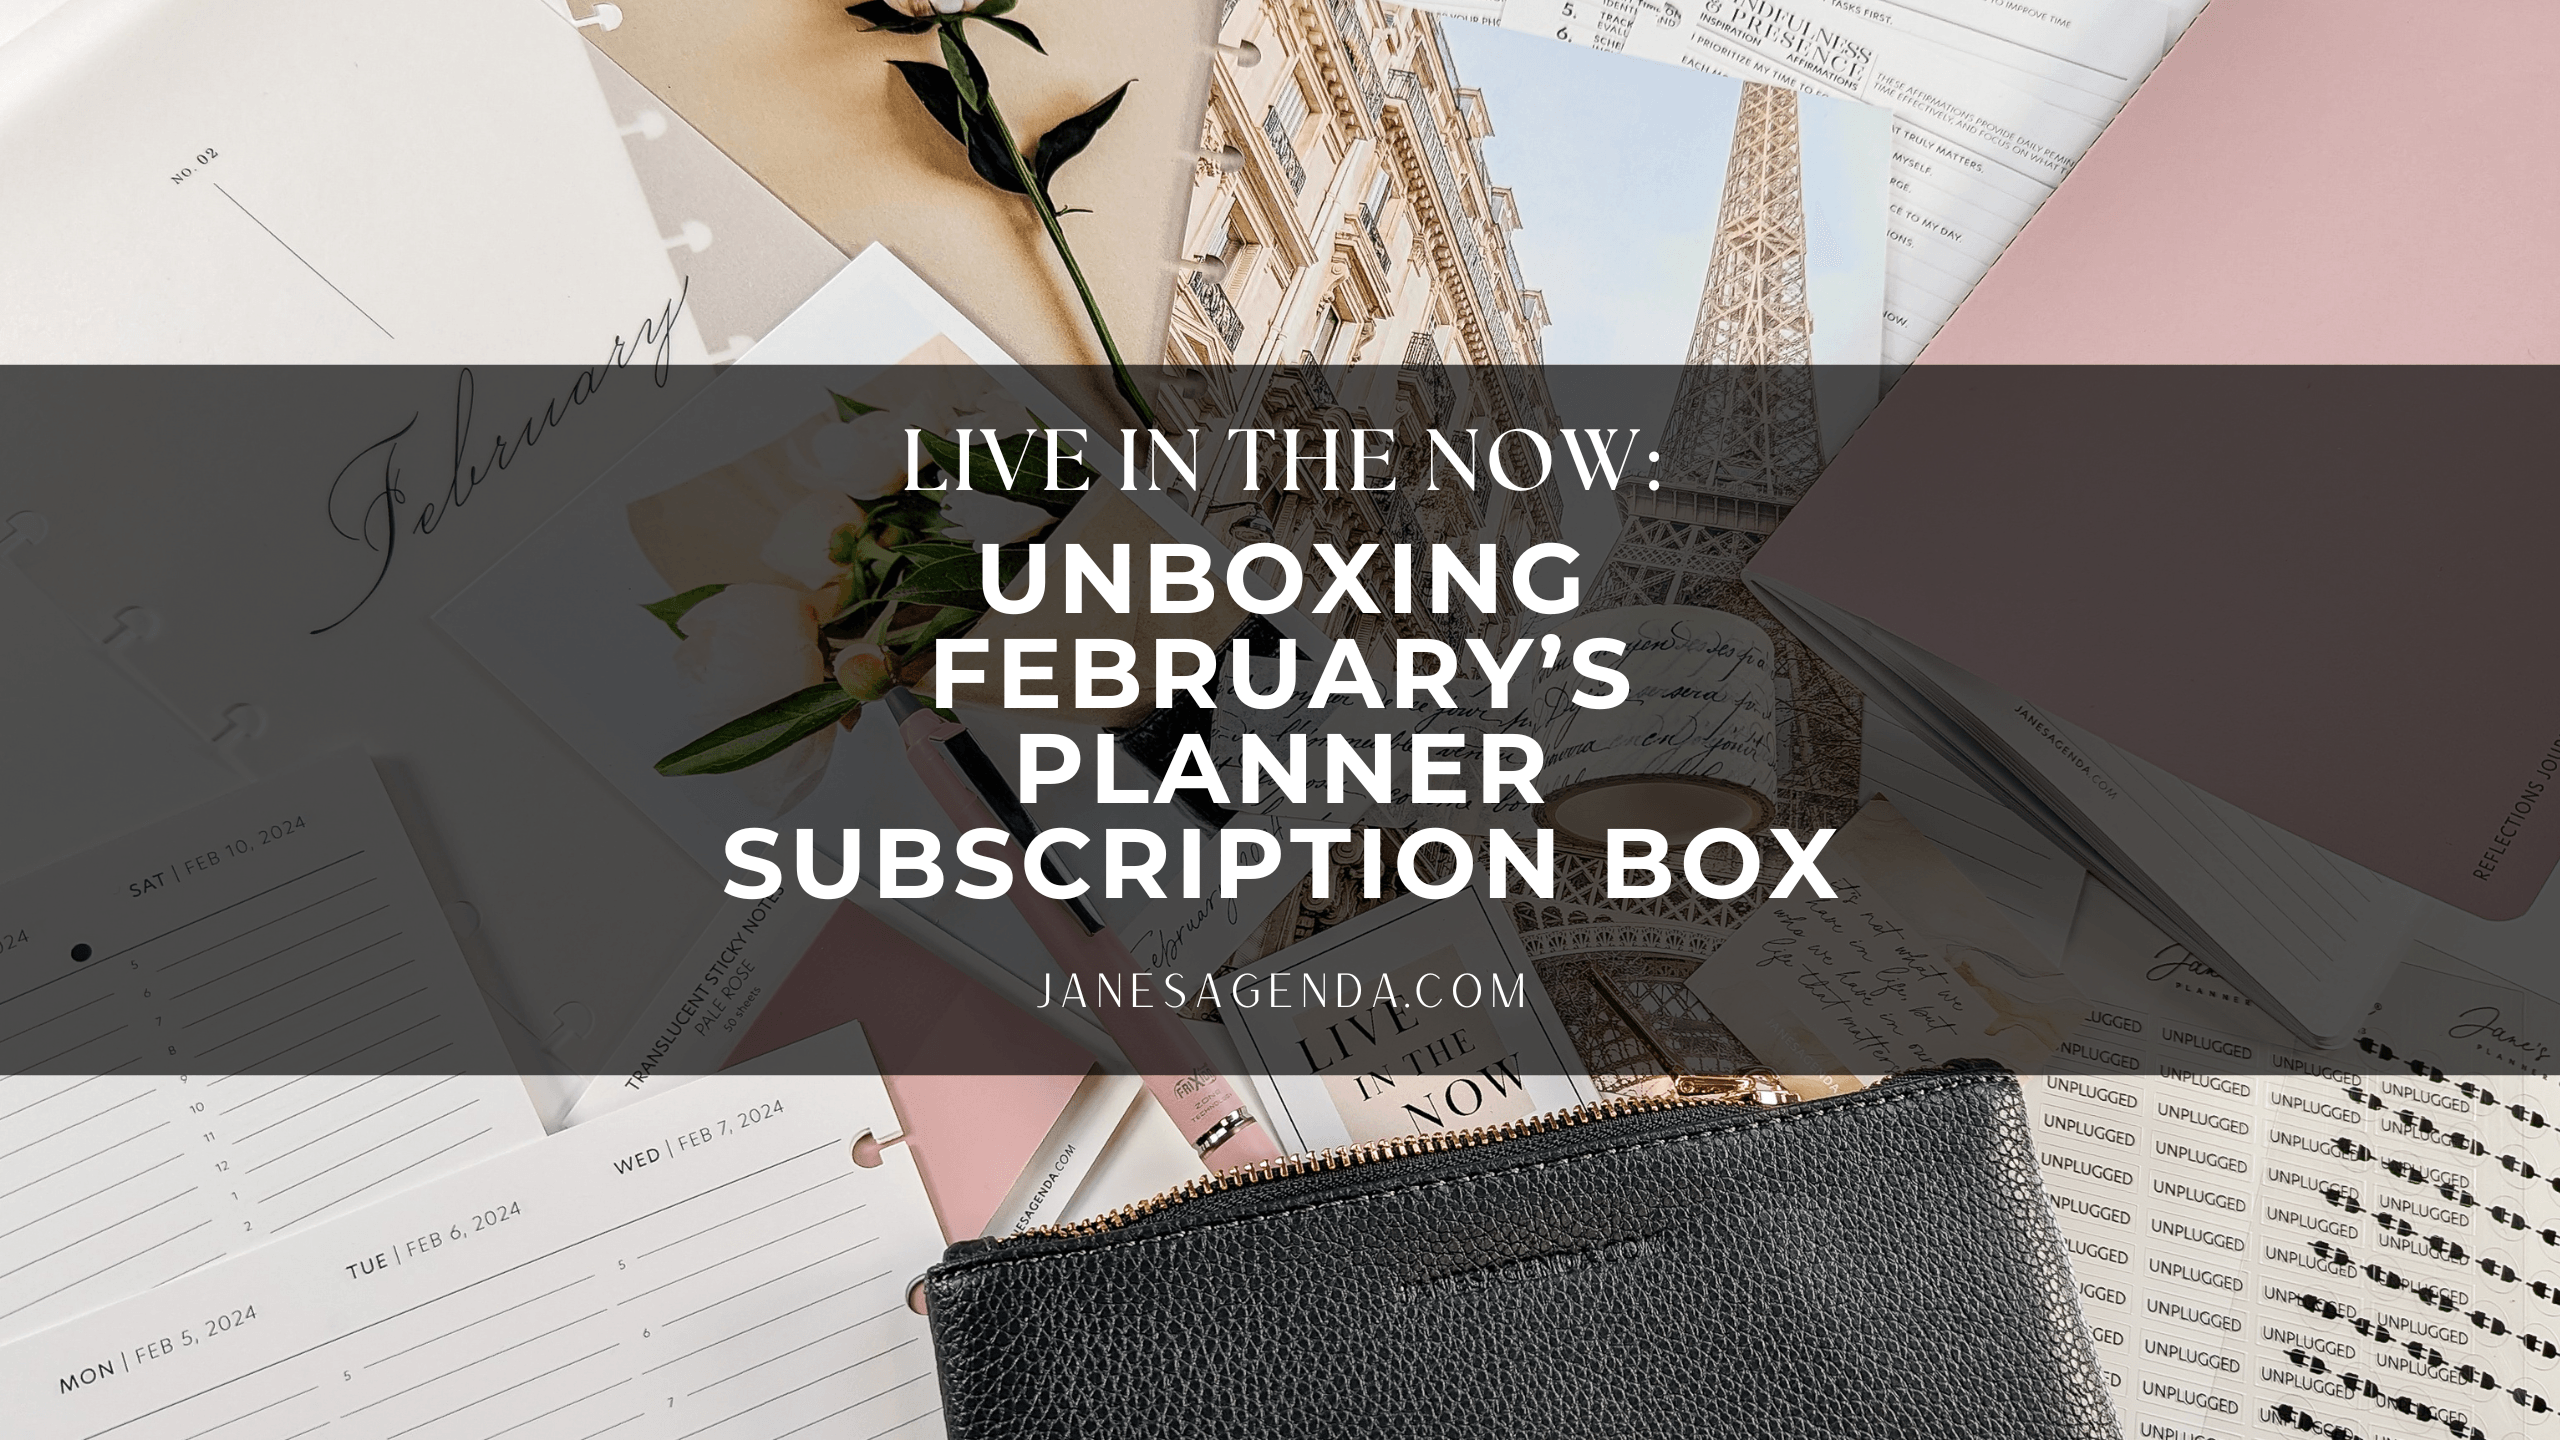 Live in the Now: Embrace the Present with February's Planner Subscription Box - Jane's Agenda®